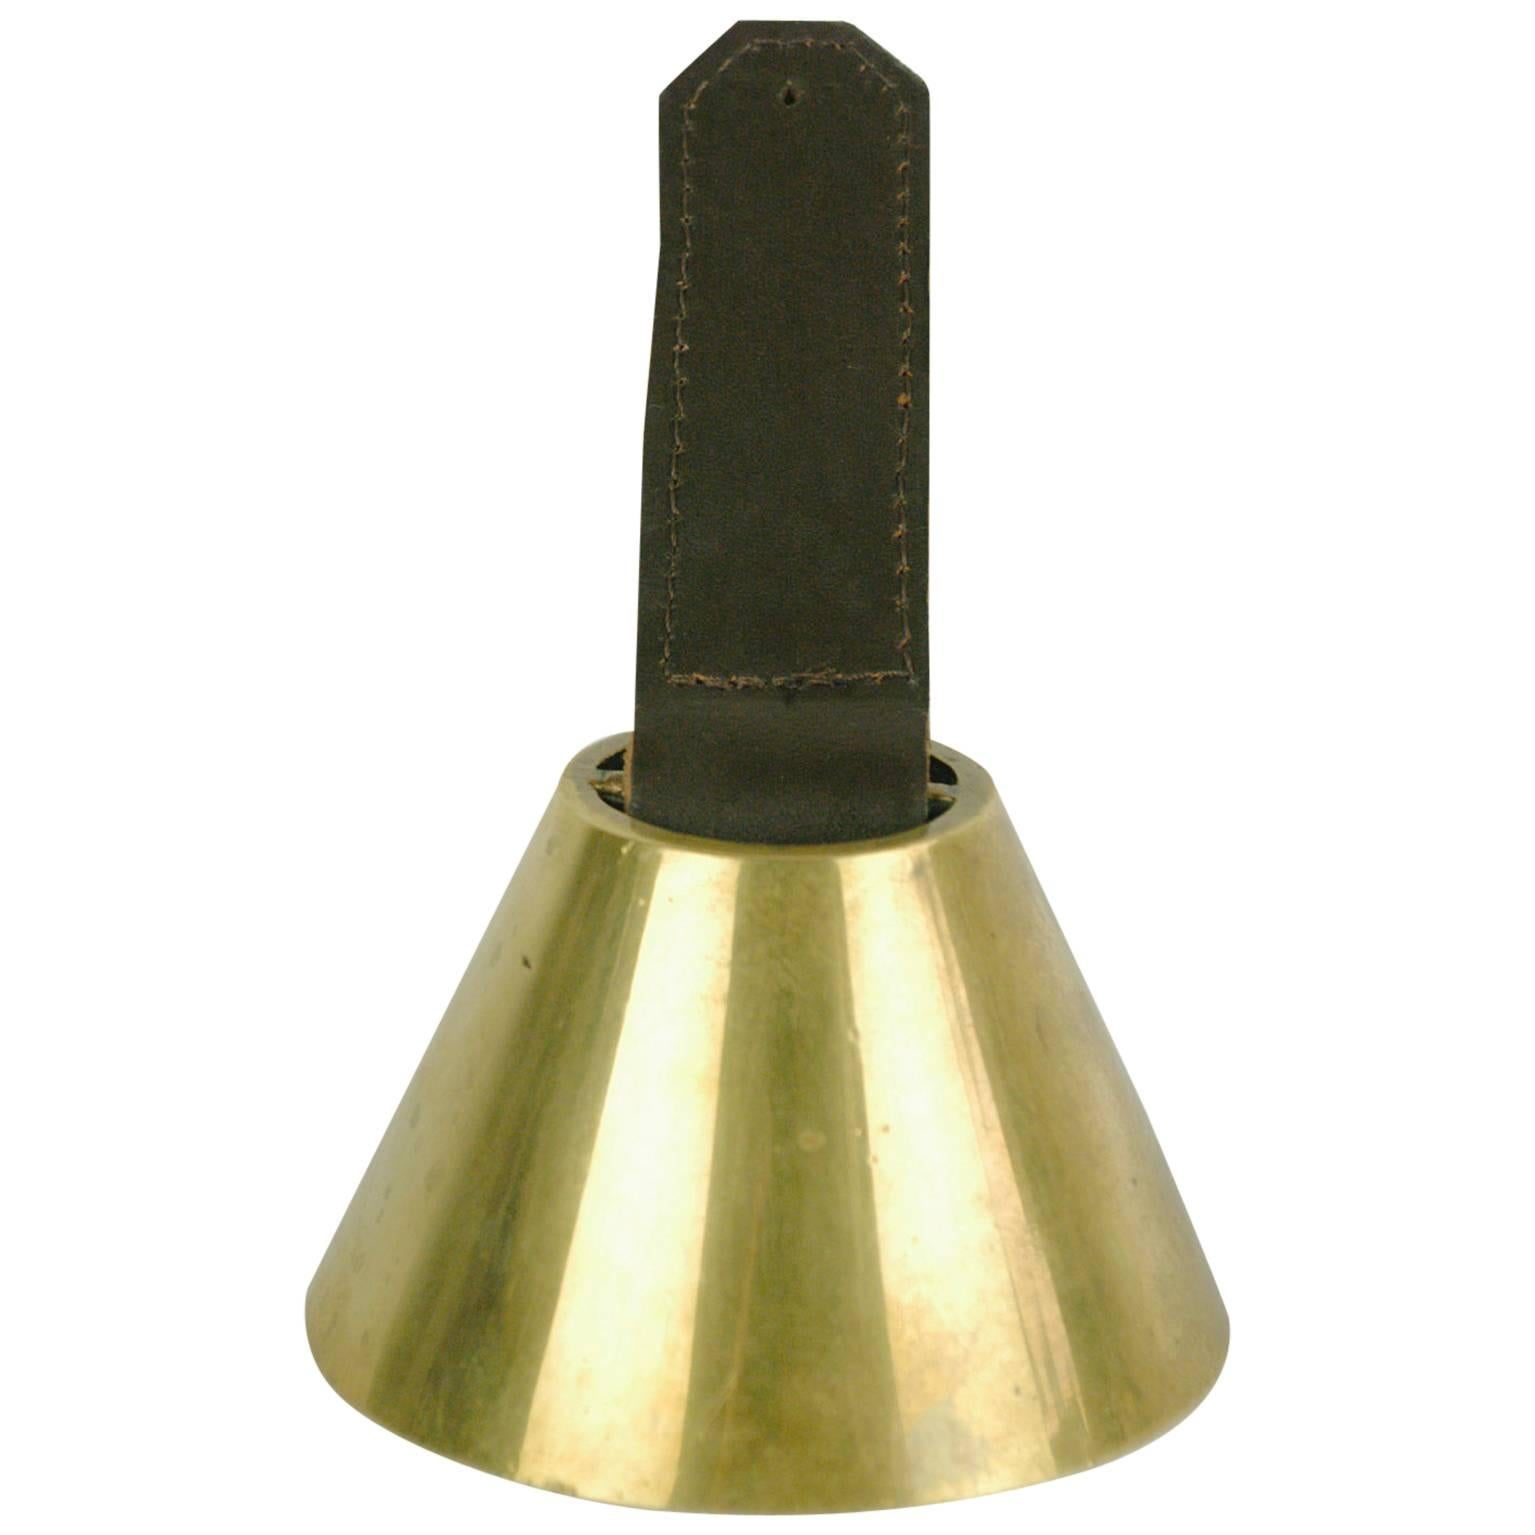 Austrian Midcentury Brass and Leather Table Bell by Carl Auböck For Sale